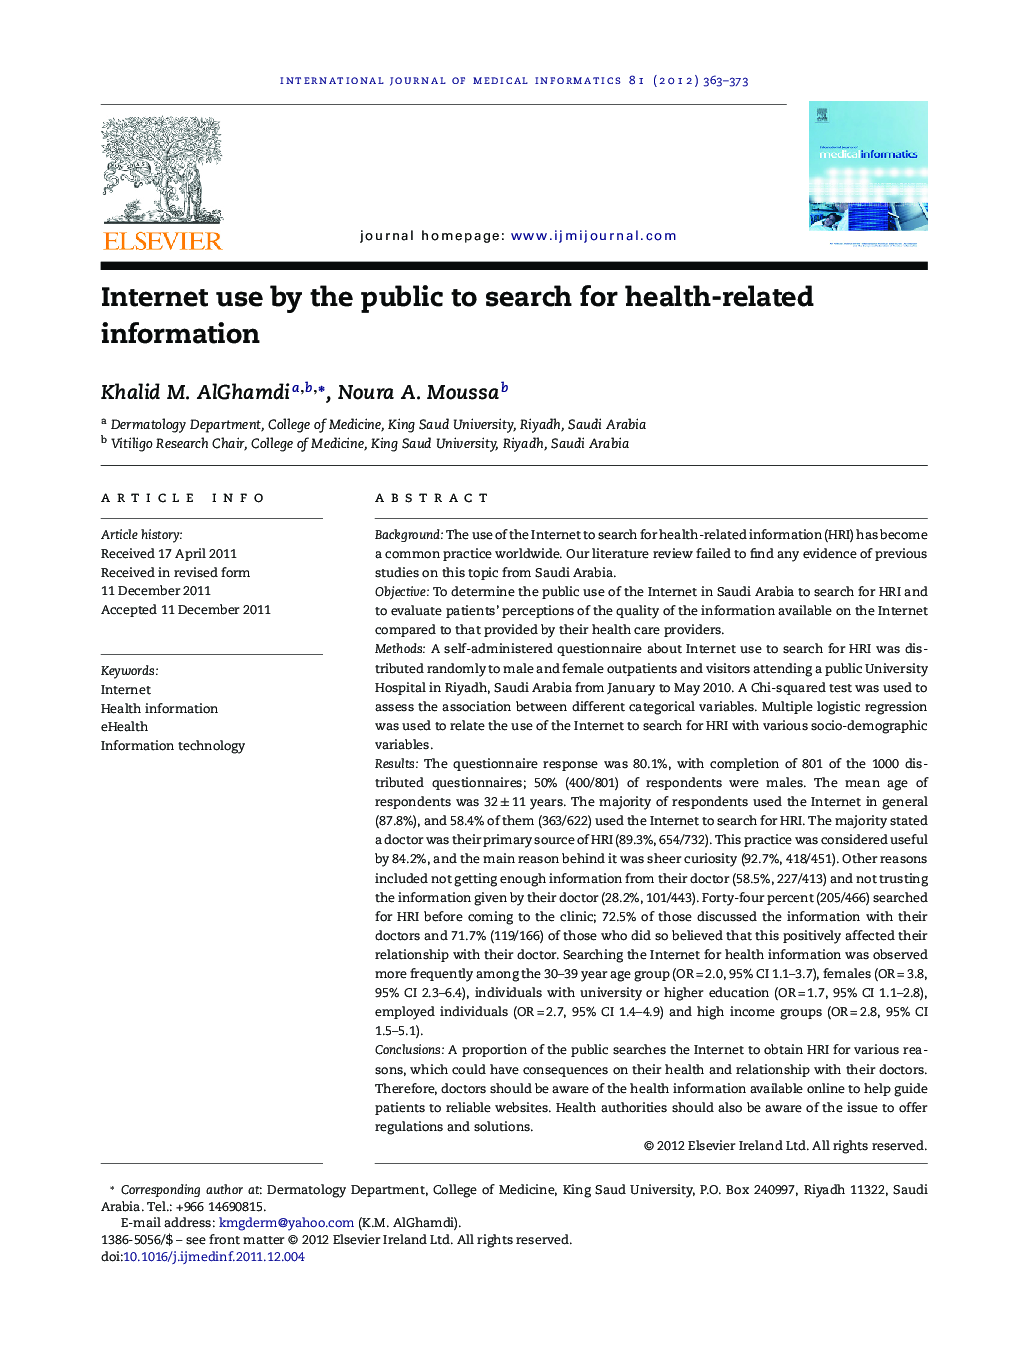 Internet use by the public to search for health-related information